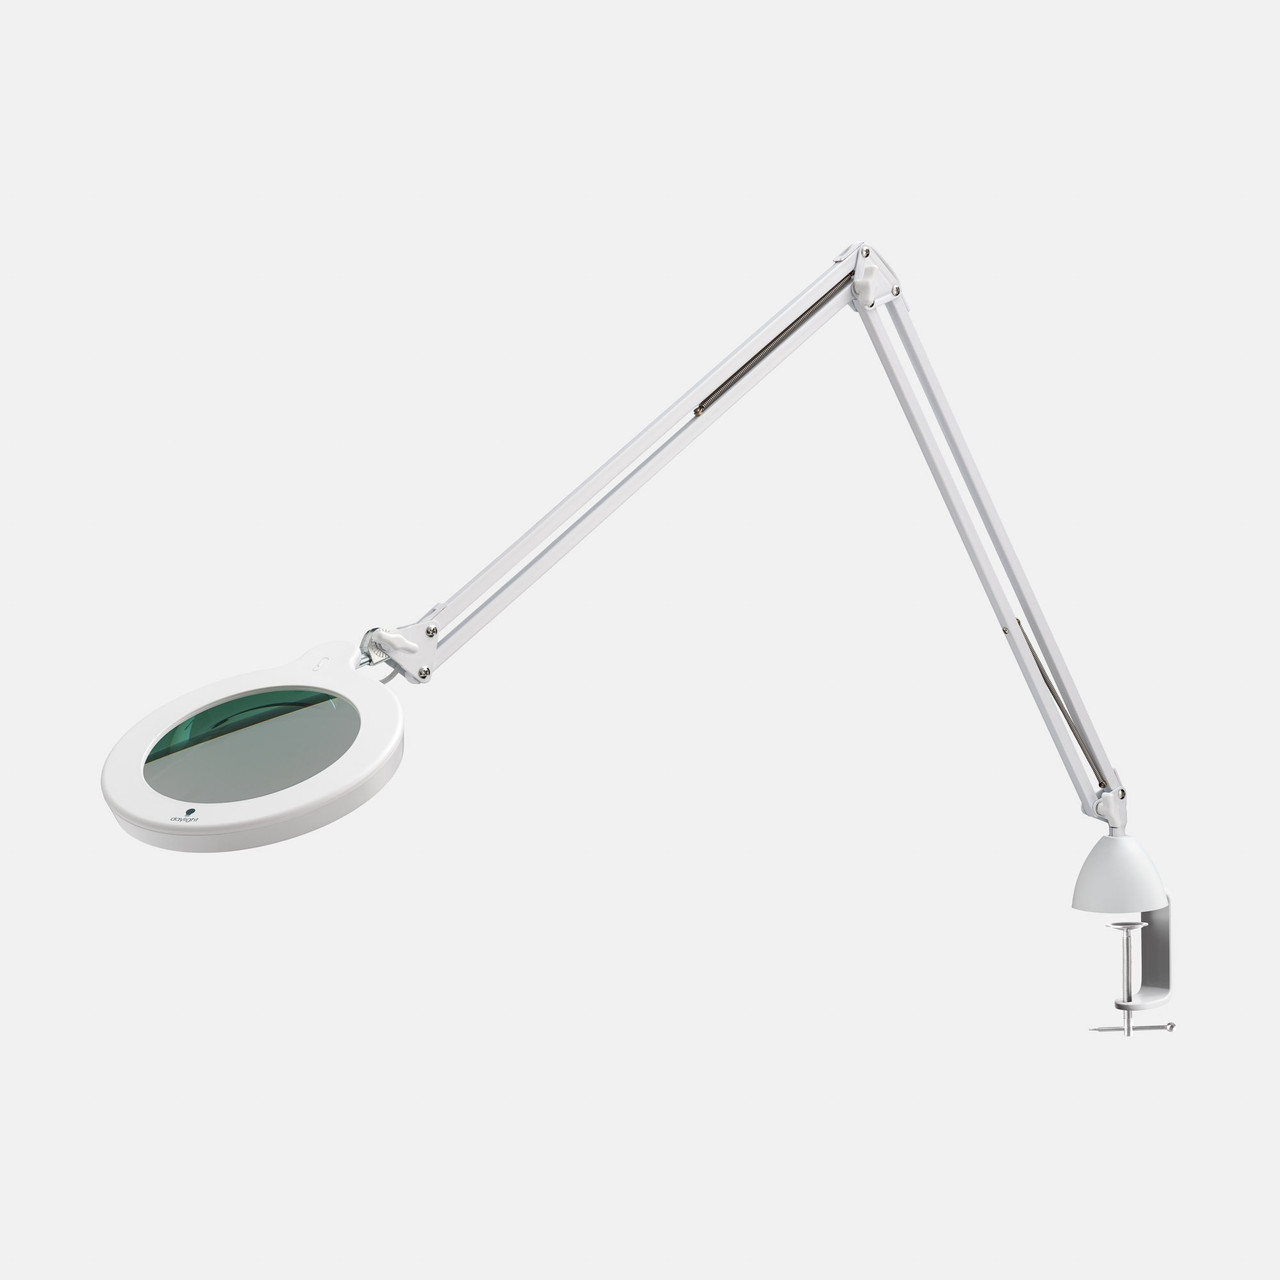 Magnifying Lamps – Daylight24 – Buy Daylight Lamps Online